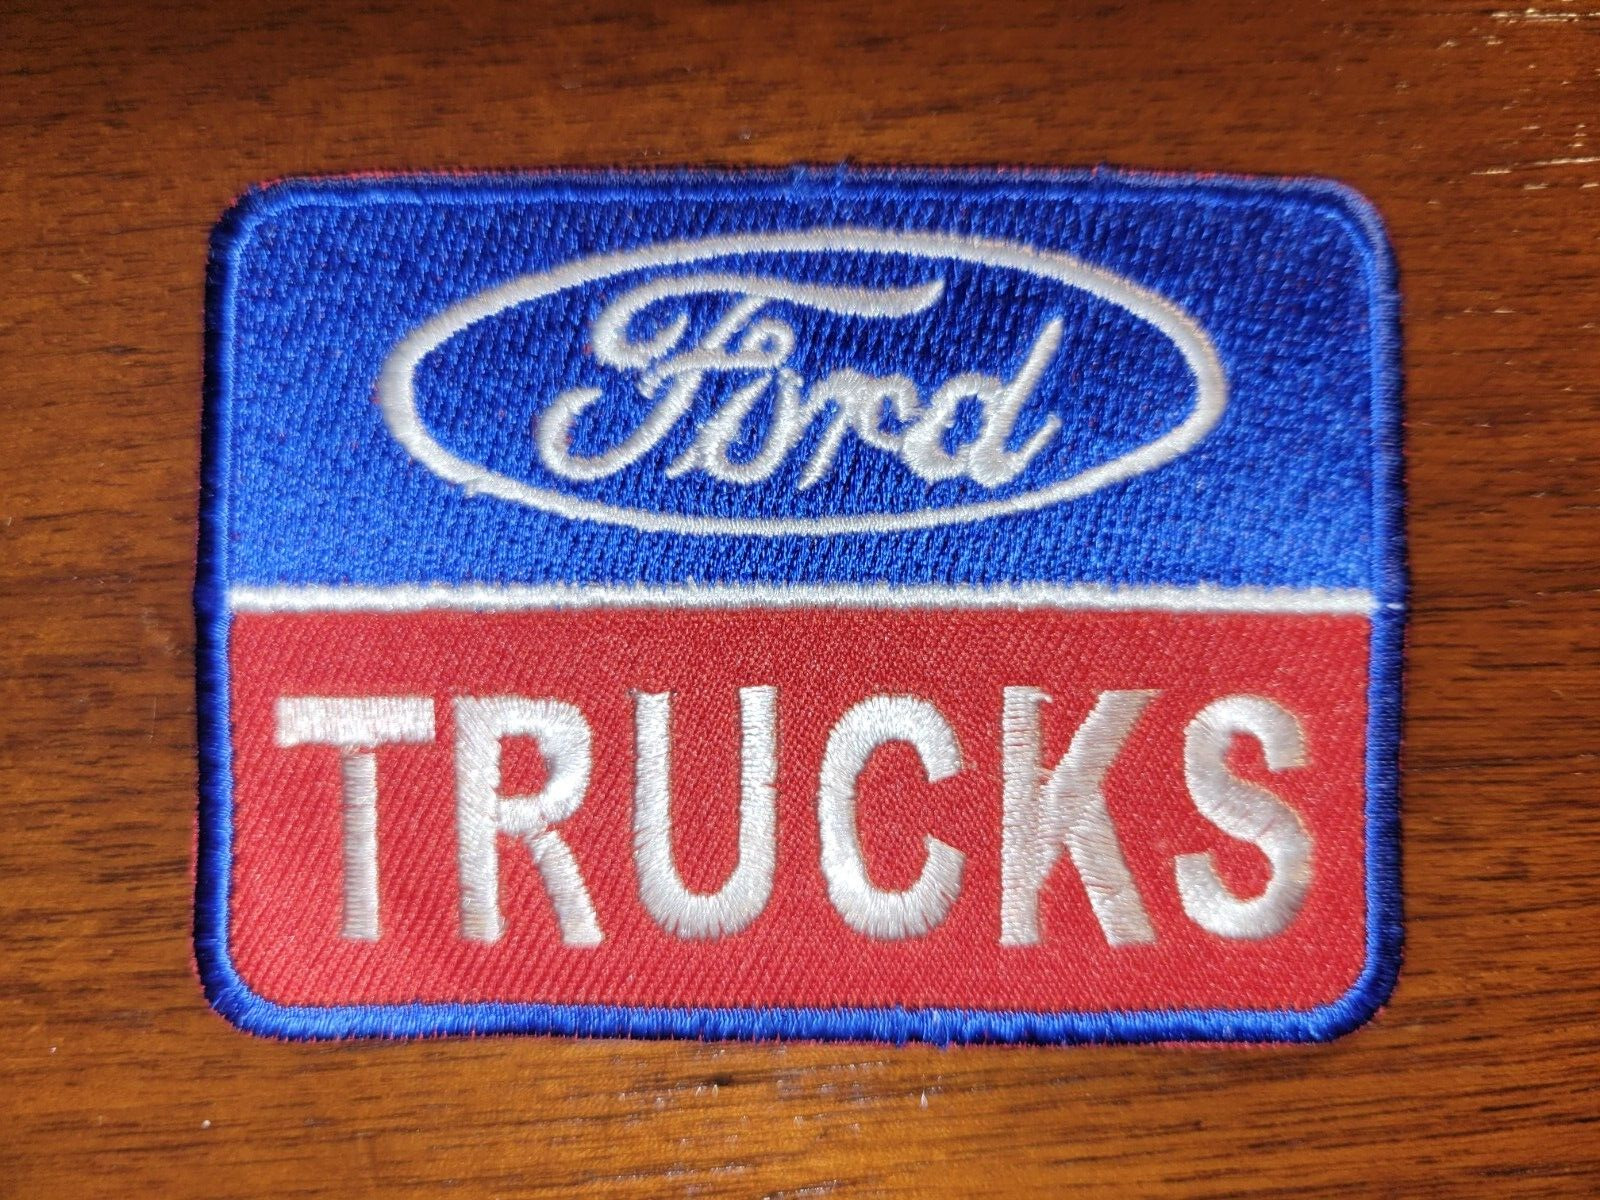 NEW 2 1/2 X 3 5/8 INCH FORD TRUCKS IRON ON PATCH 